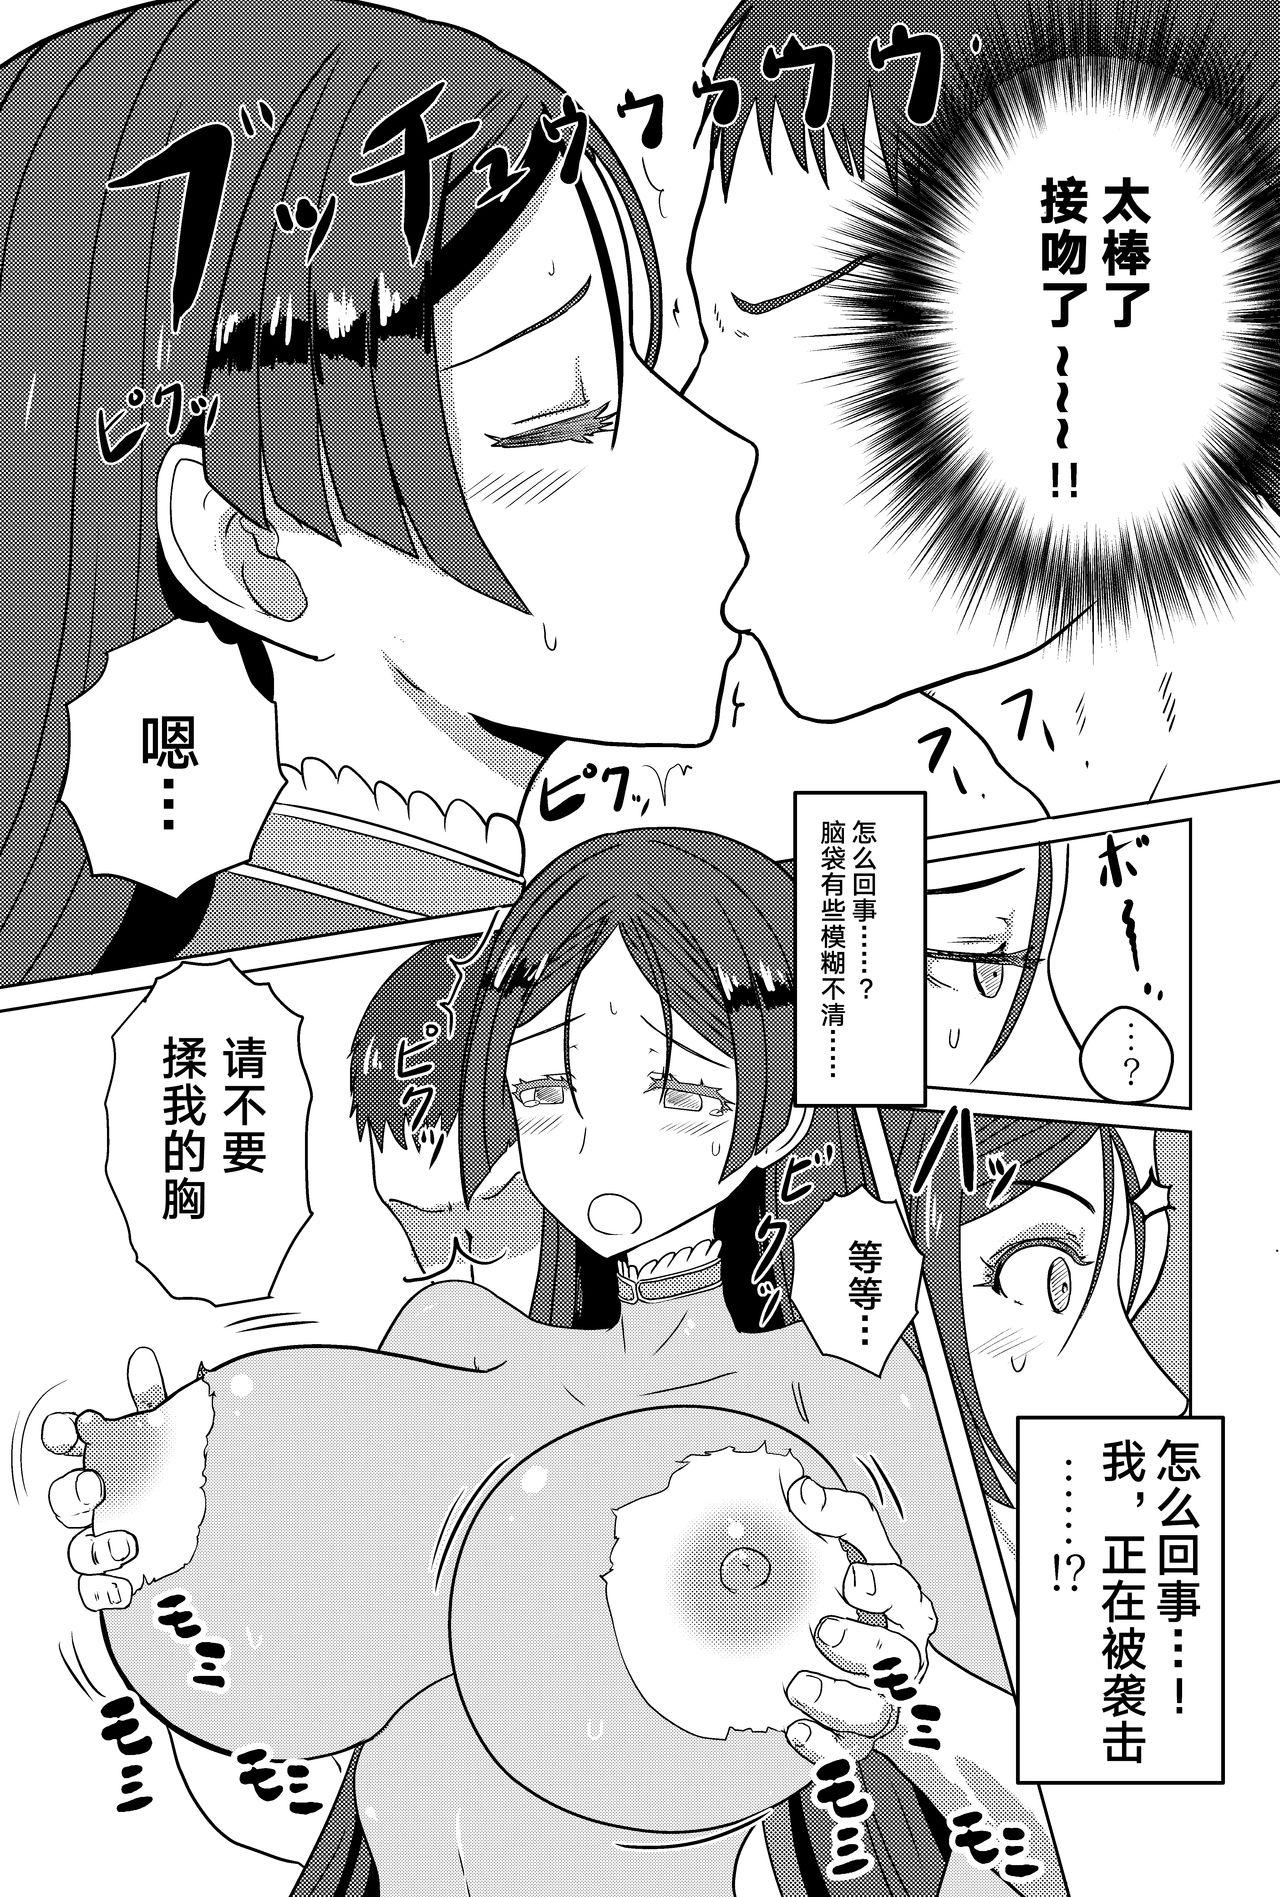 Yanks Featured 頼光ママとえっちする本 - Fate grand order Ass To Mouth - Page 5